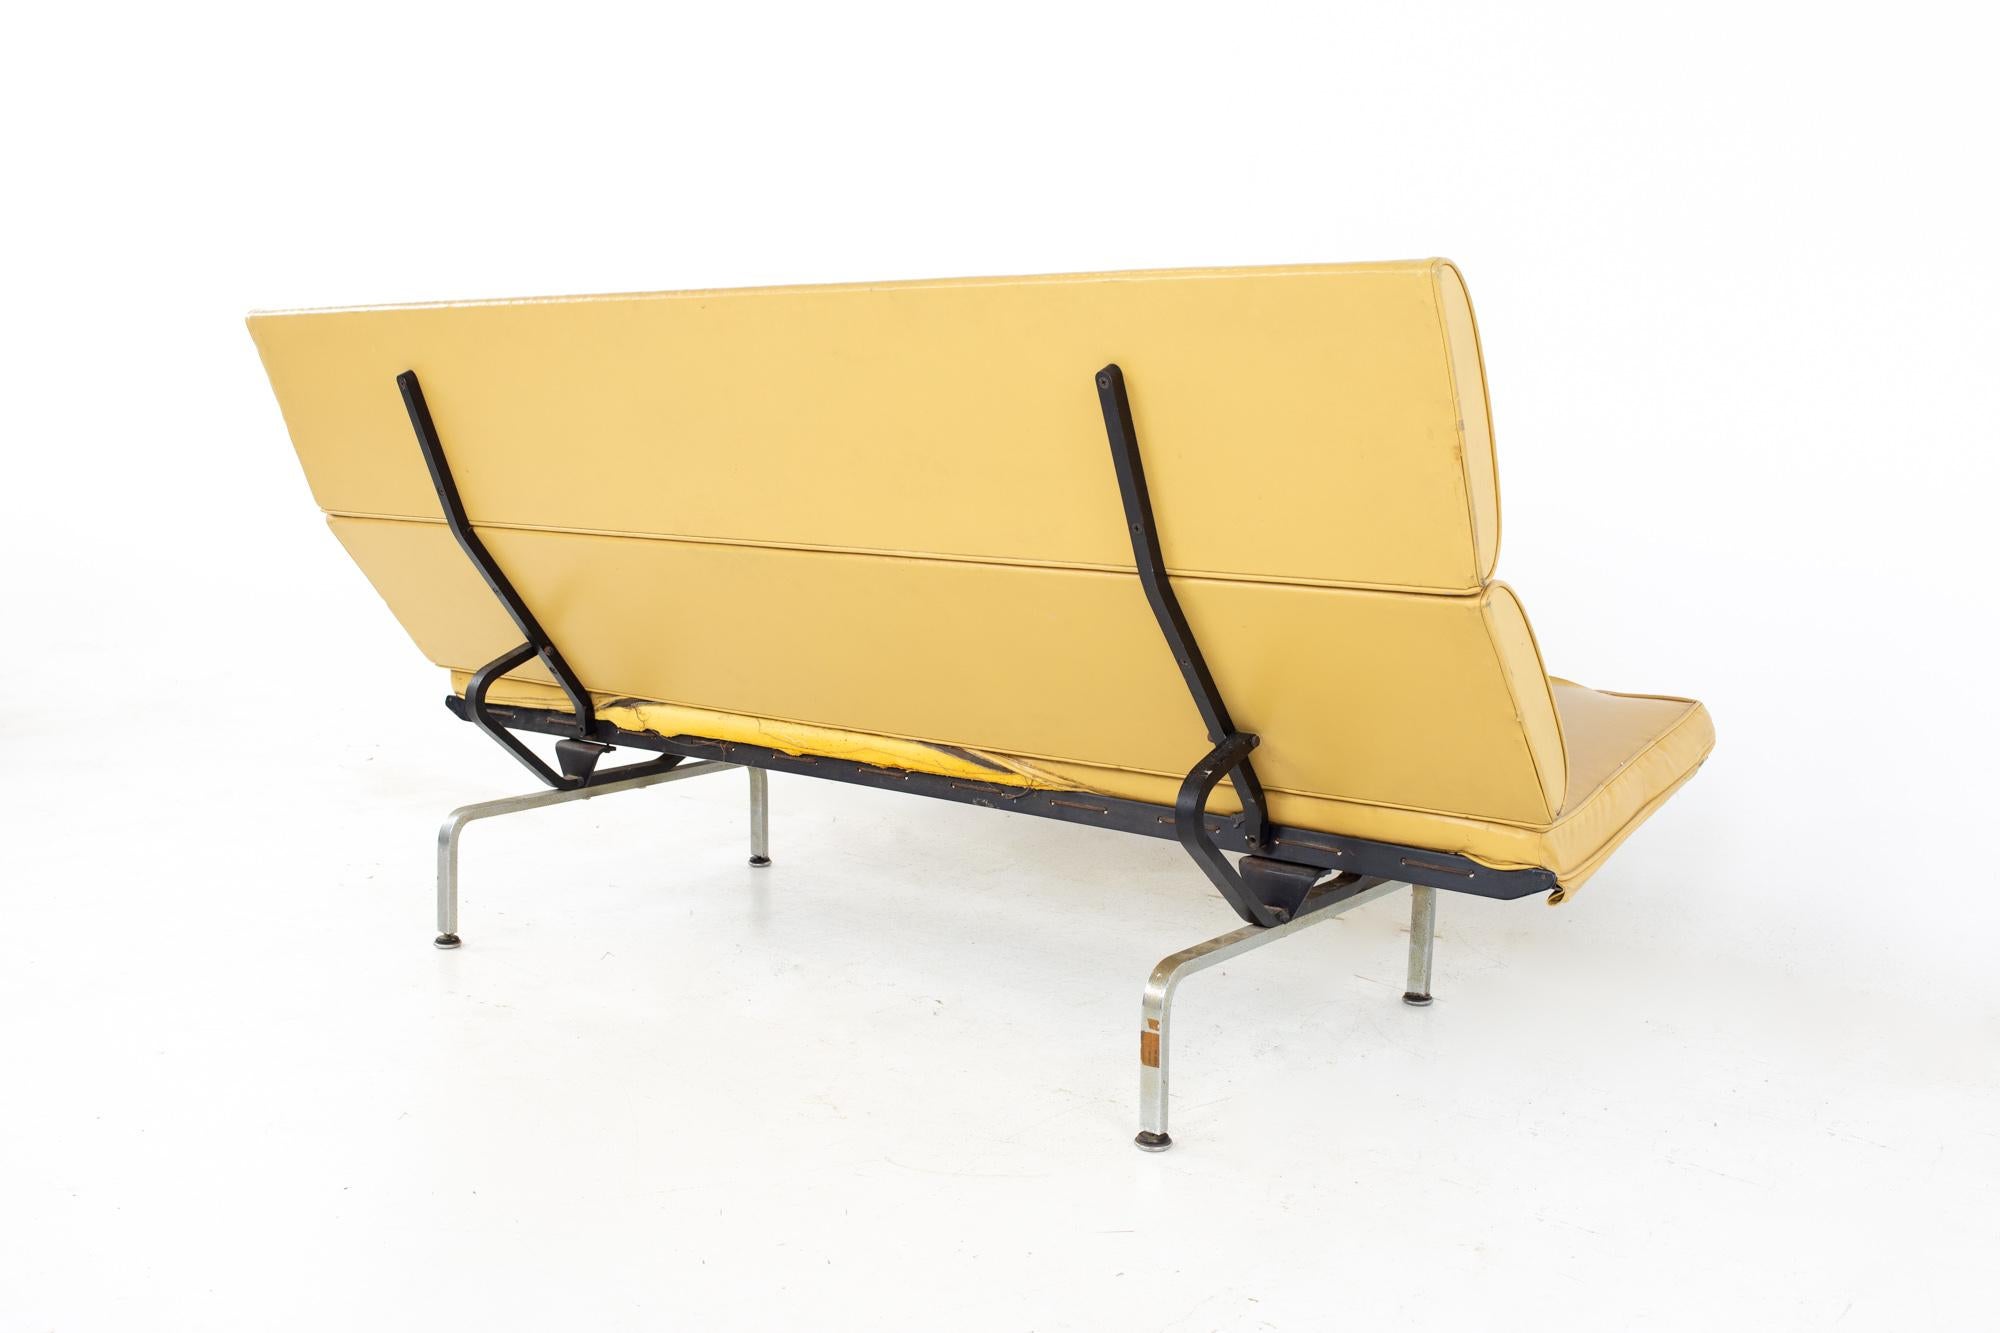 Late 20th Century Early Charles and Ray Eames for Herman Miller Mid Century Compact Daybed Sofa